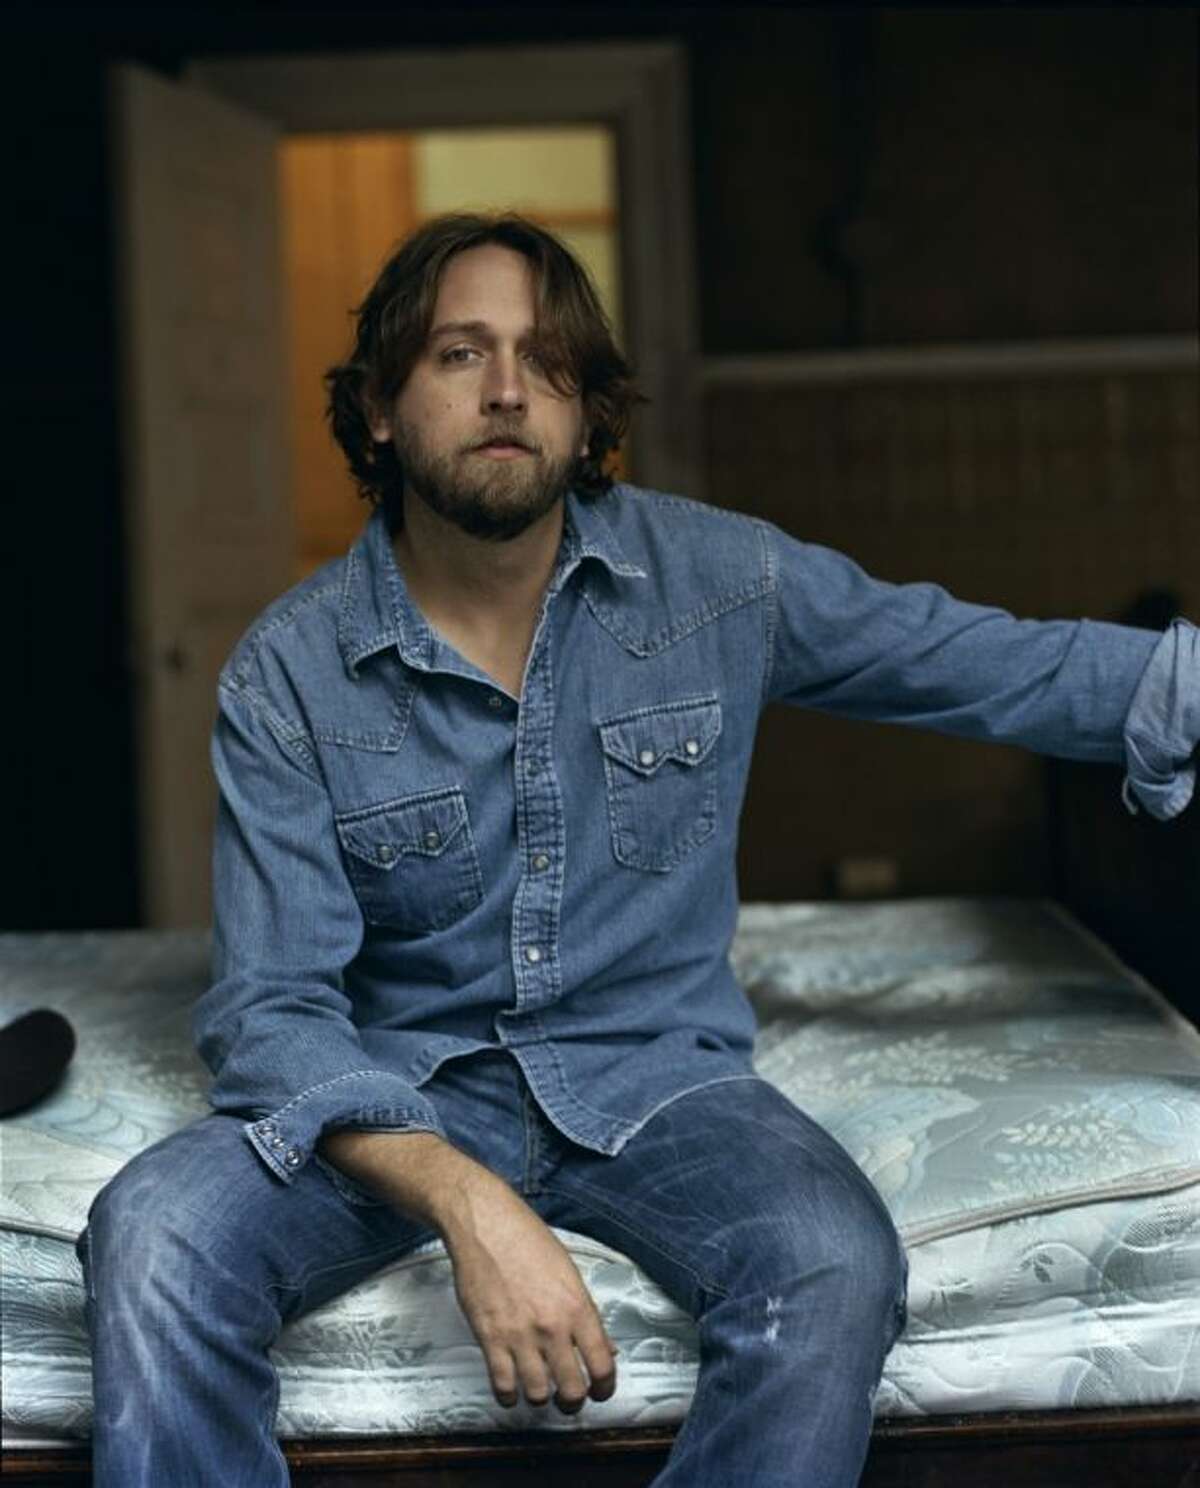 The Woodlands native Hayes Carll returns to the area for a Feb. 26 show at Dosey Doe Big Barn.